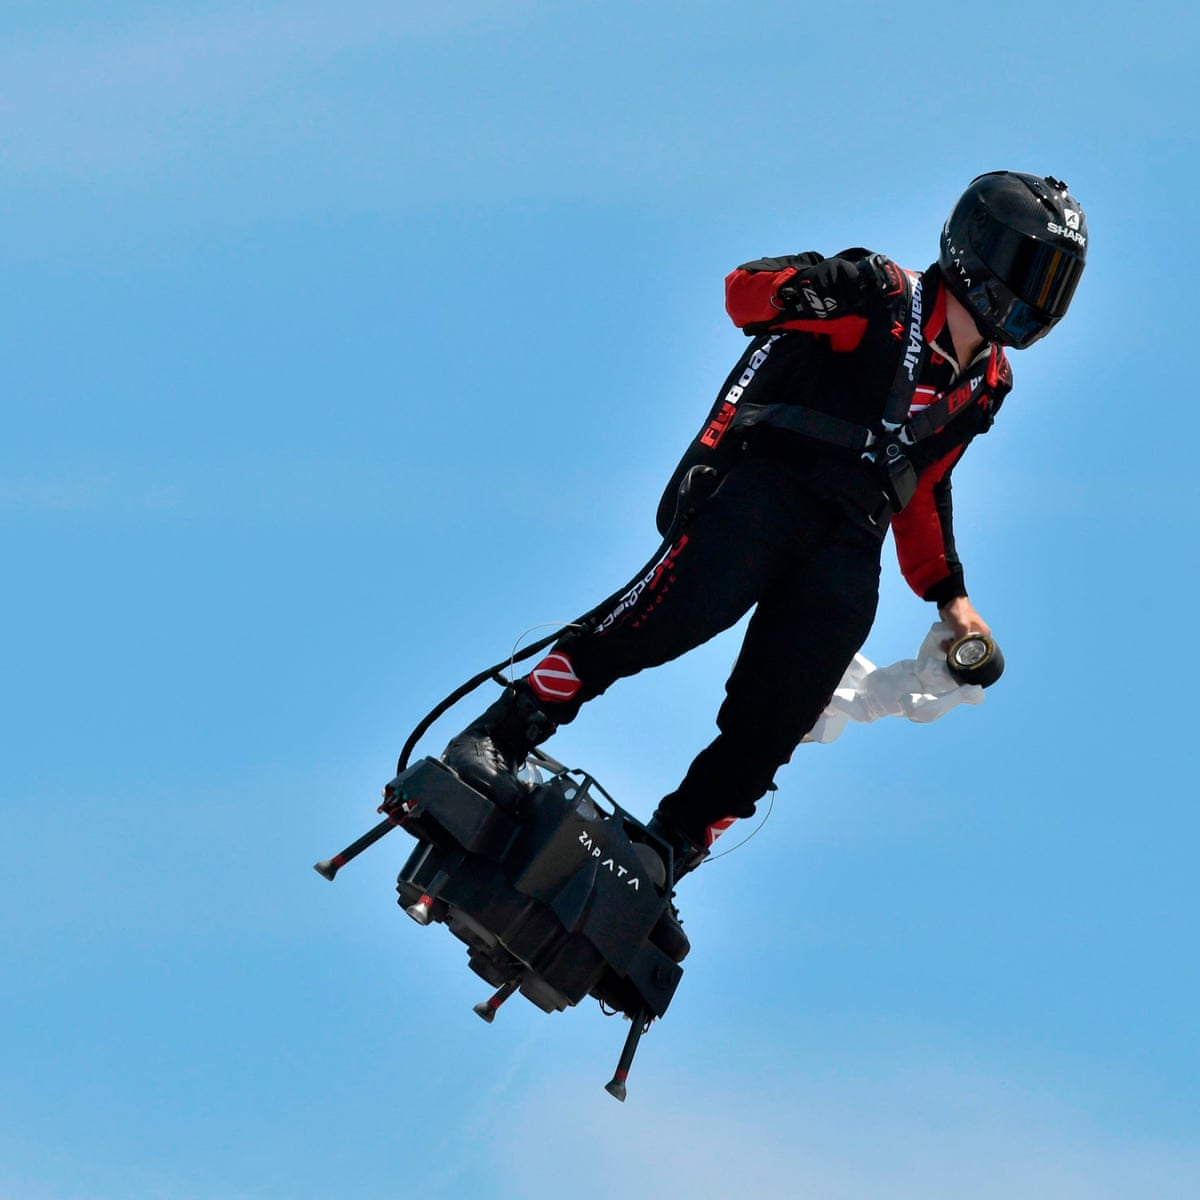 French inventor to attempt to cross Channel on jet-powered flyboard, France